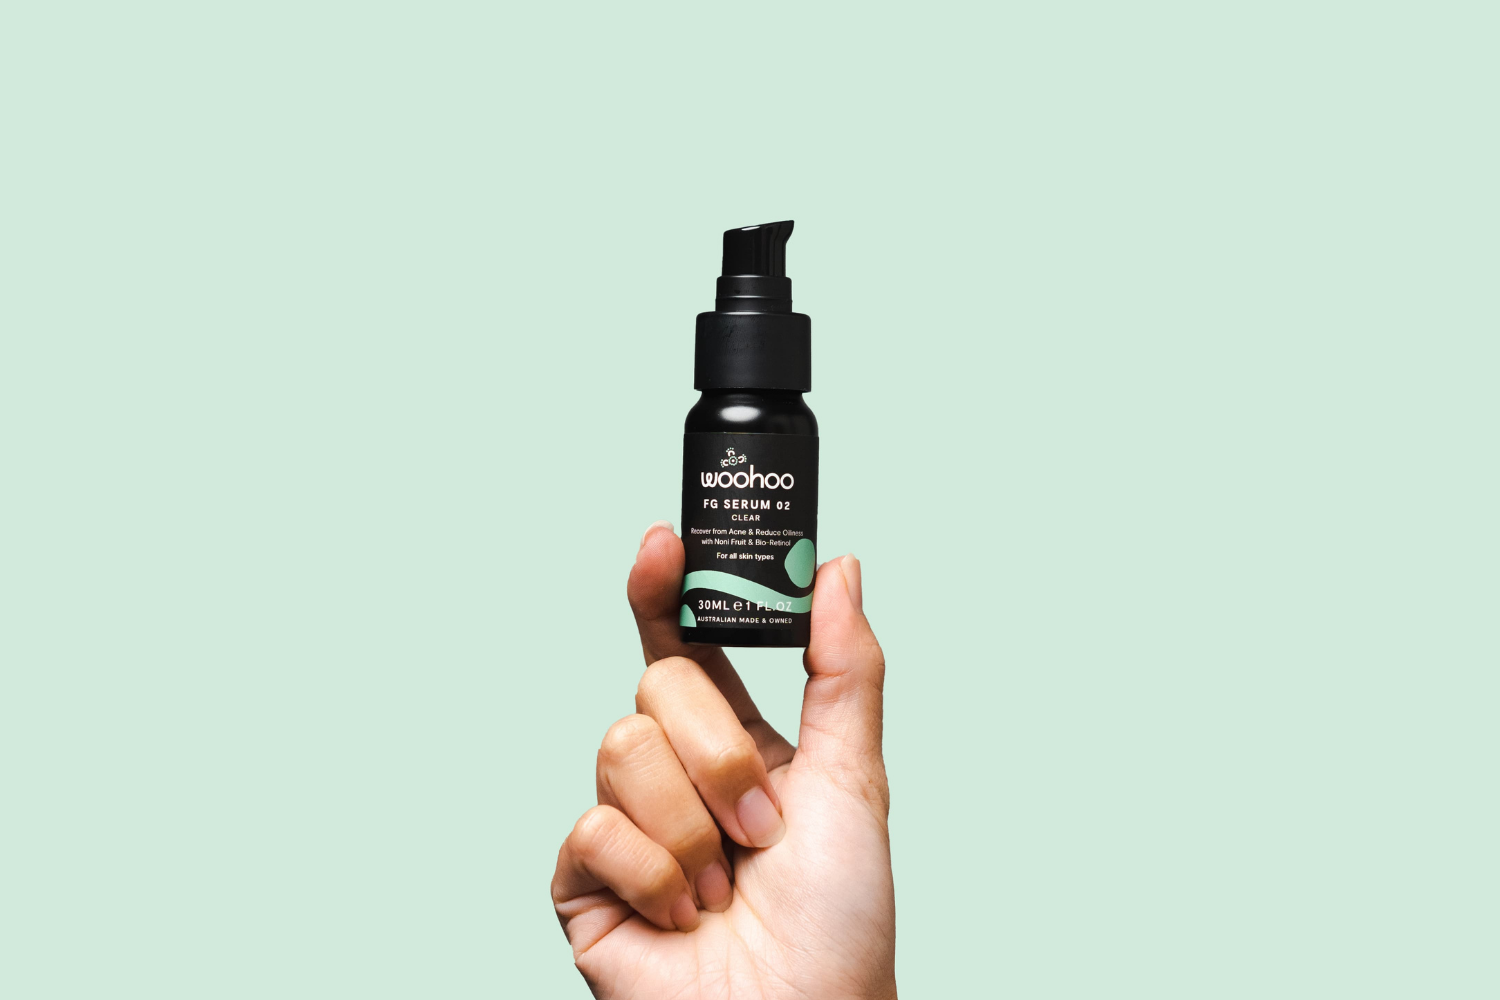 How to use your 'FG' Serum 02 - Clear (blemishes + acne)